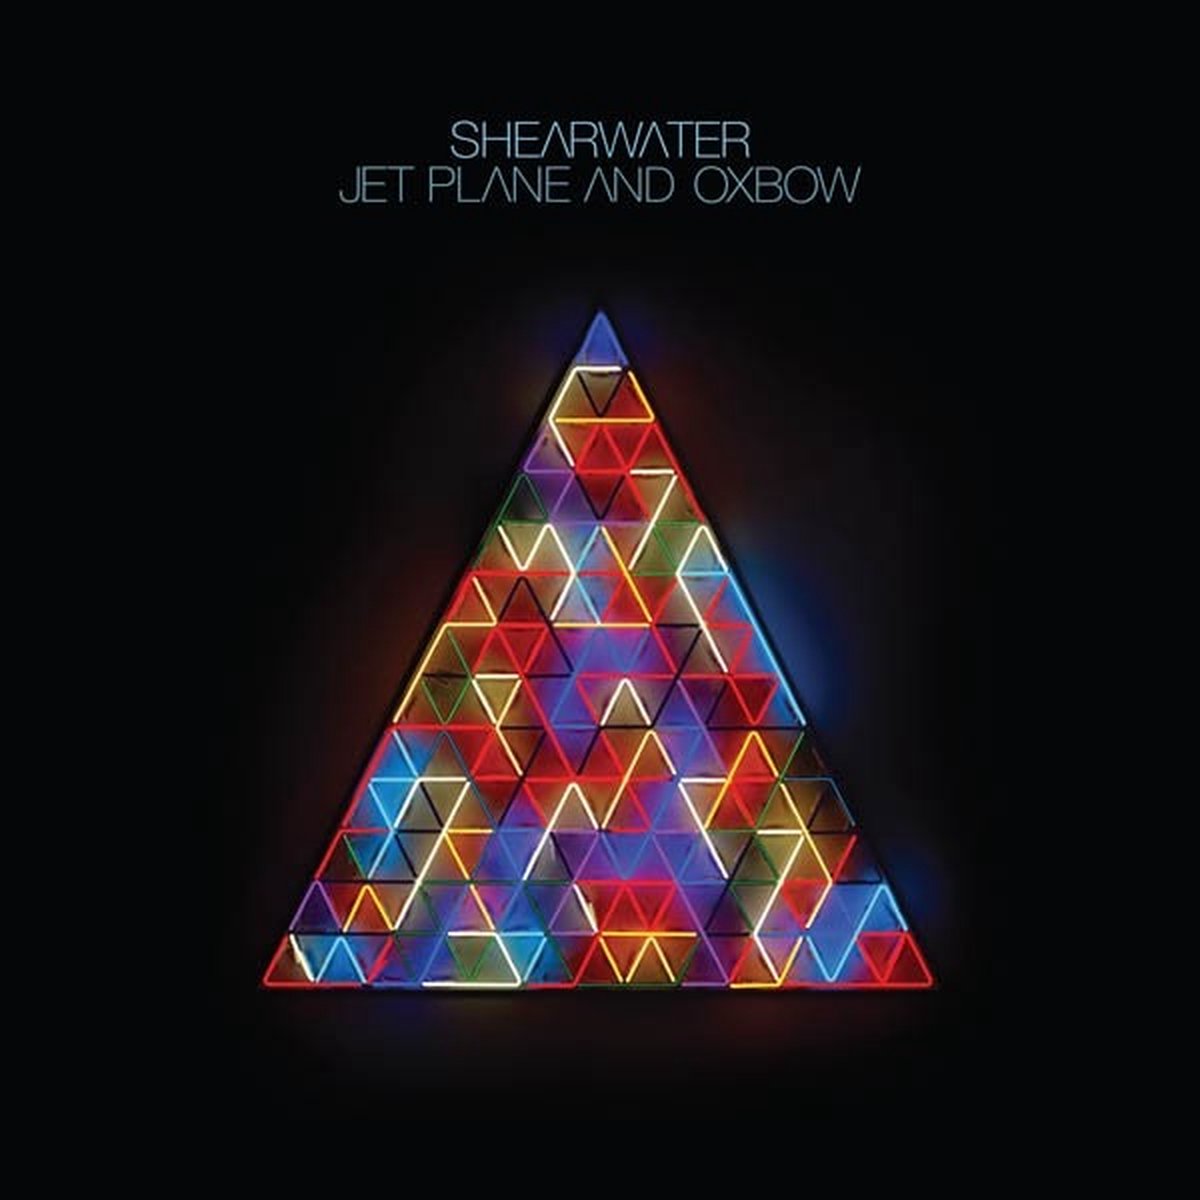 Shearwater - Jet Plane And Oxbox (2 LP) ( Loser Edition) (Coloured Vinyl)